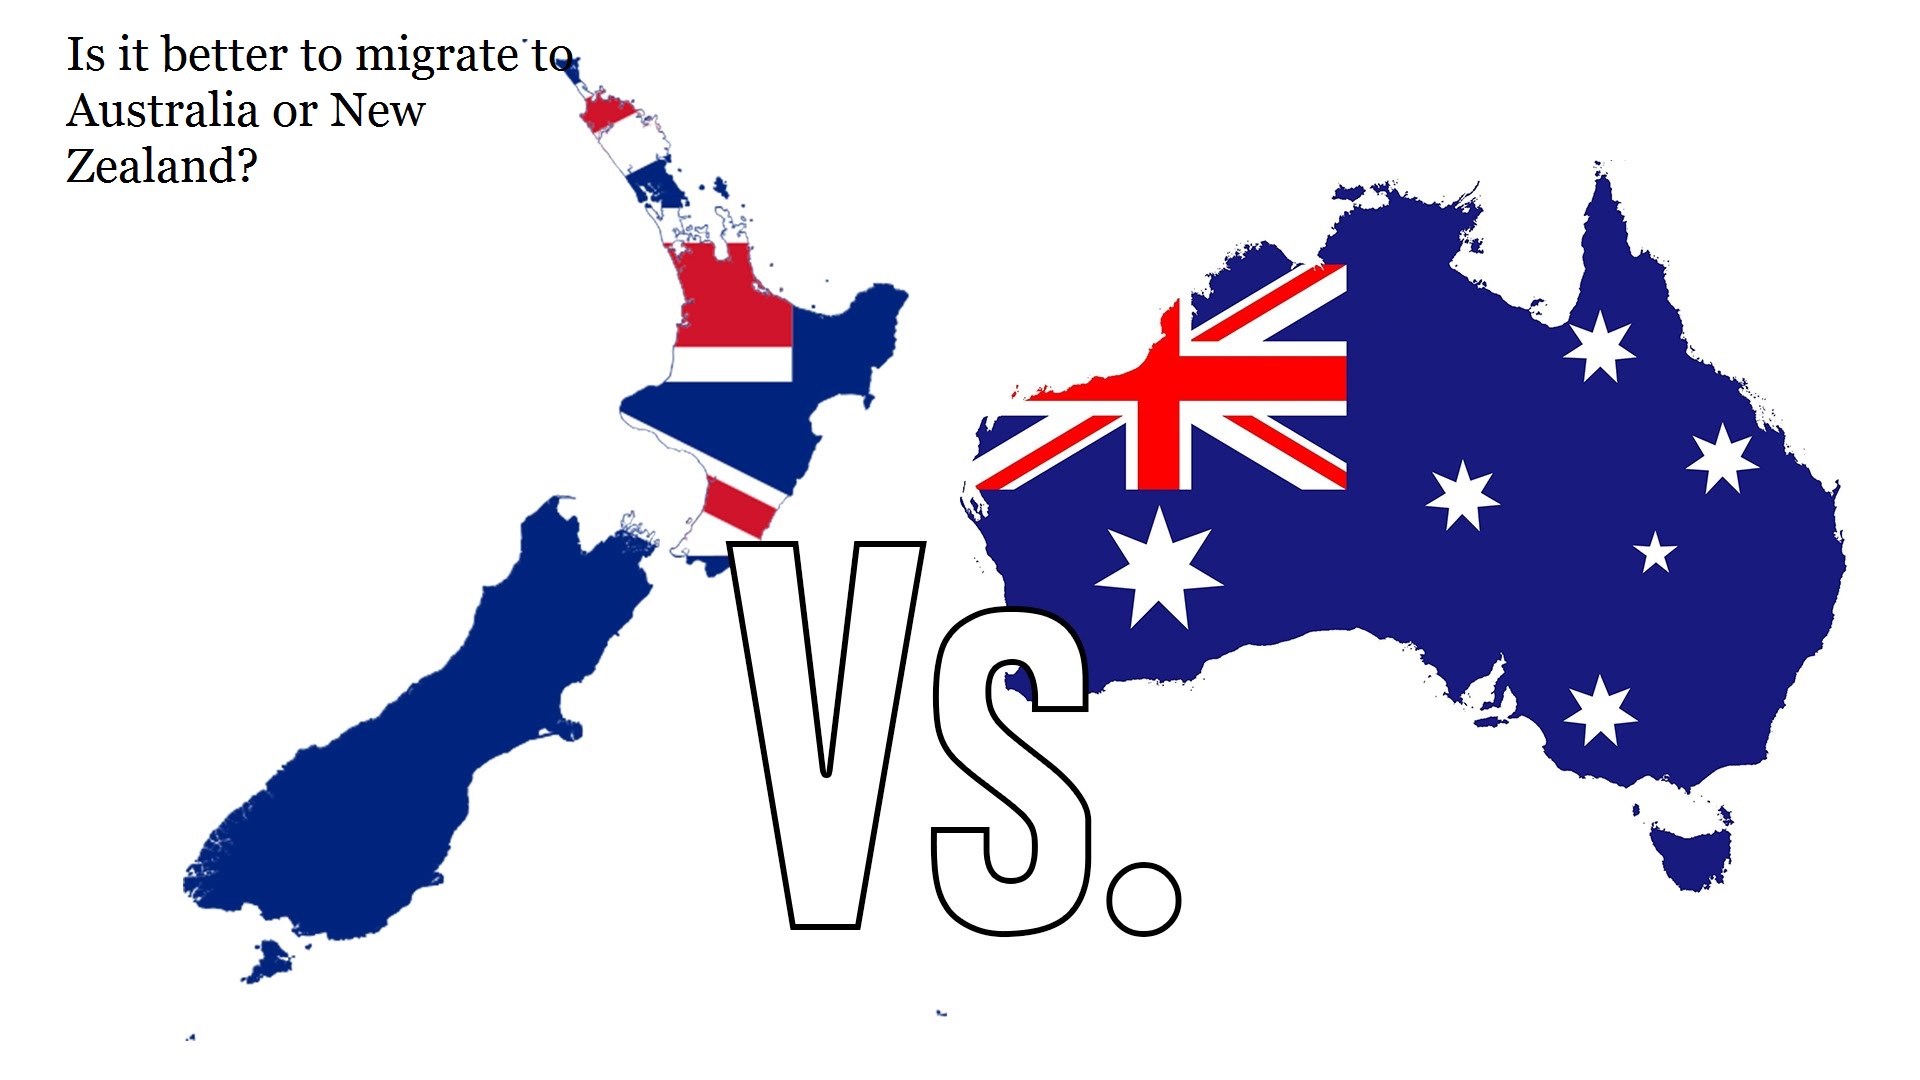 Is it better to migrate to Australia or New Zealand?